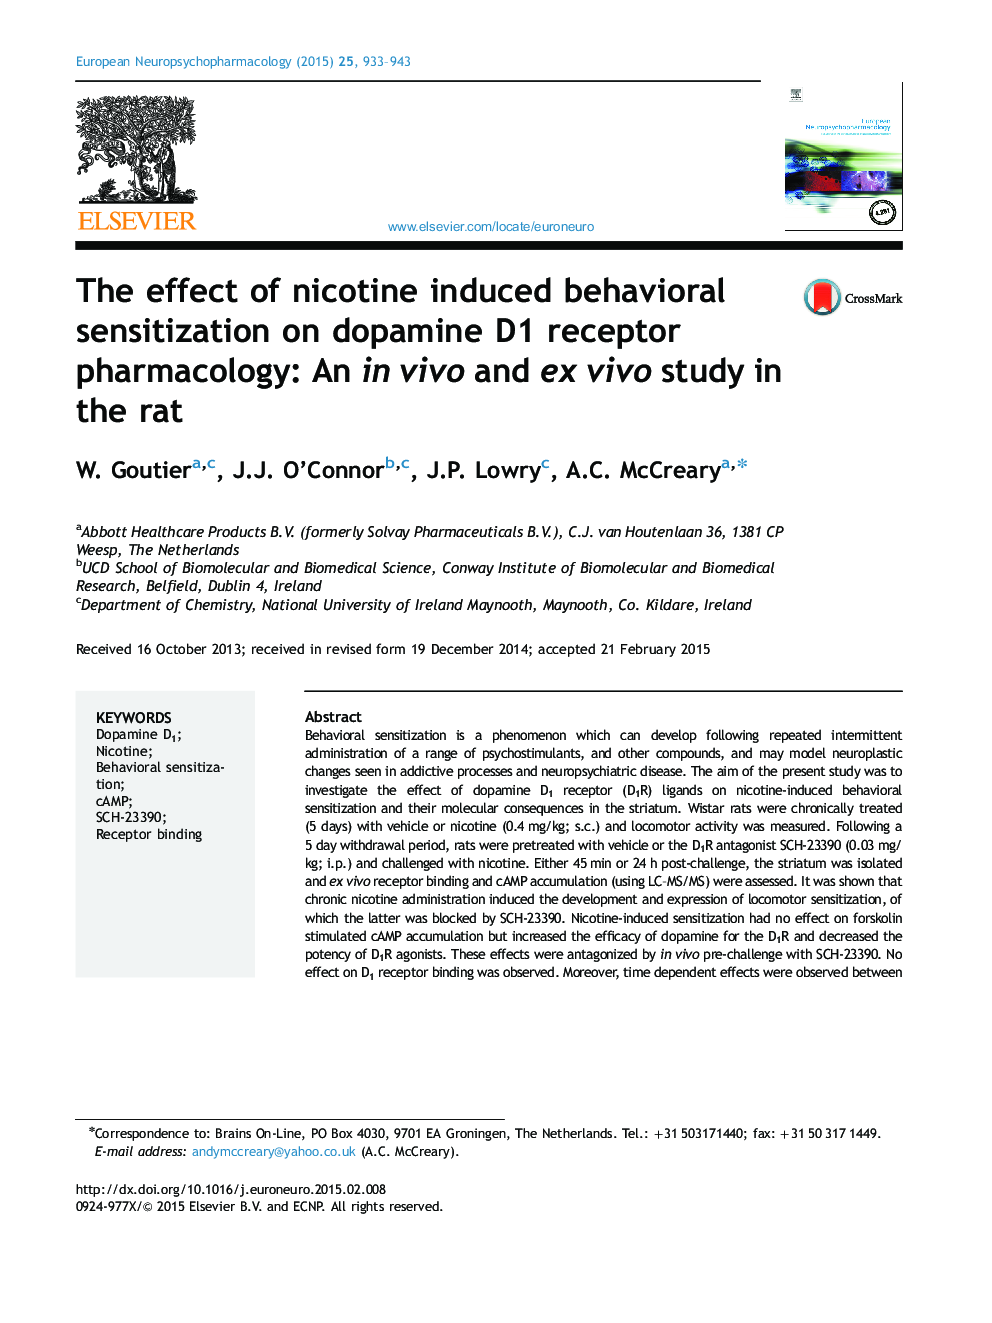 The effect of nicotine induced behavioral sensitization on dopamine D1 receptor pharmacology: An in vivo and ex vivo study in the rat